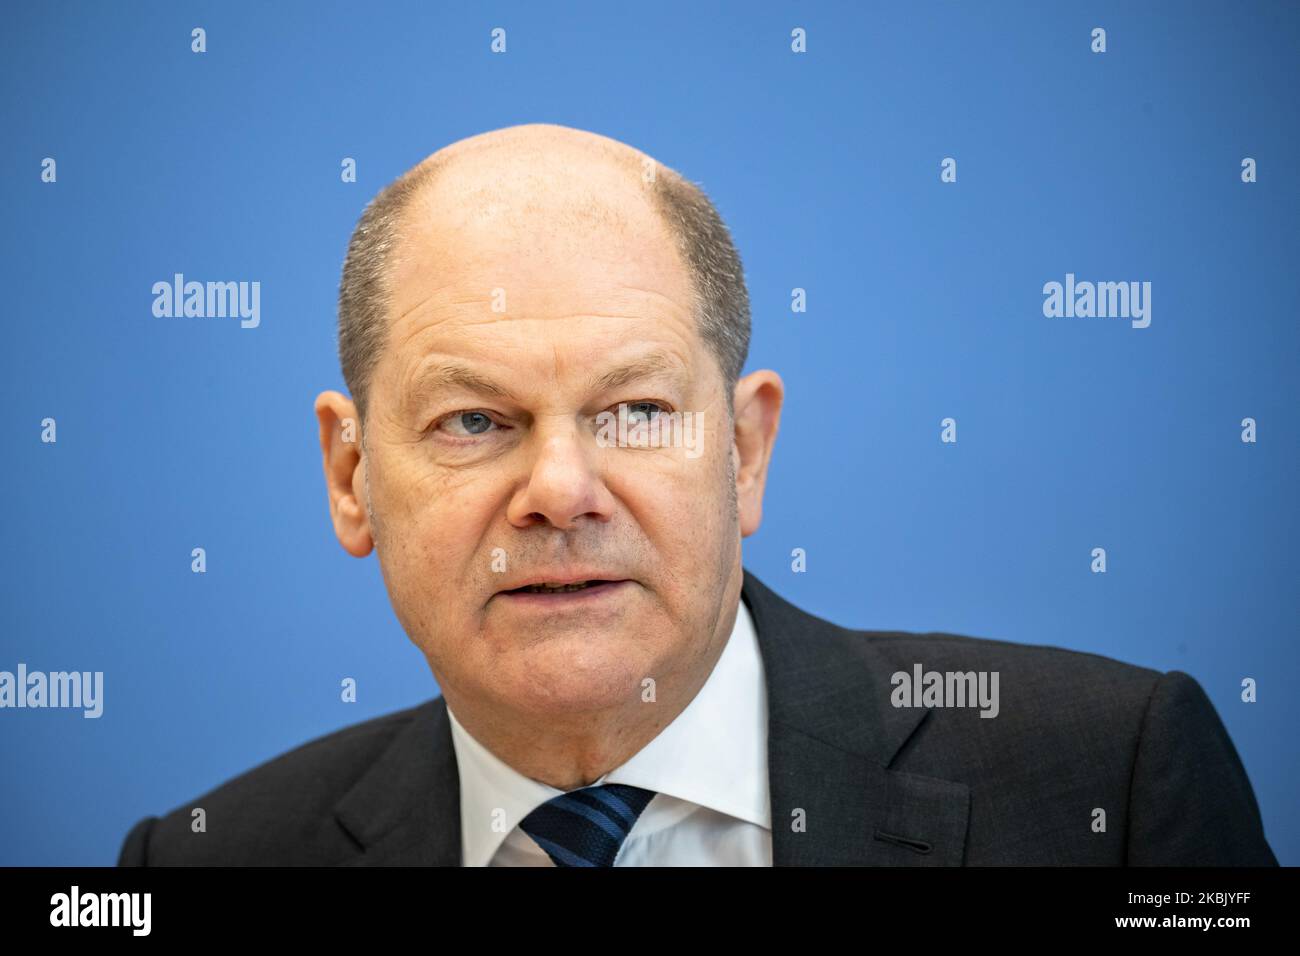 German Finance Minister Olaf Scholz attends a press conference to announce measures to contrast the economic consequences of the Coronavirus crise at the Bundespressekonferenz in Berlin, Germany on Marsch 13, 2020. (Photo by Emmanuele Contini/NurPhoto) Stock Photo